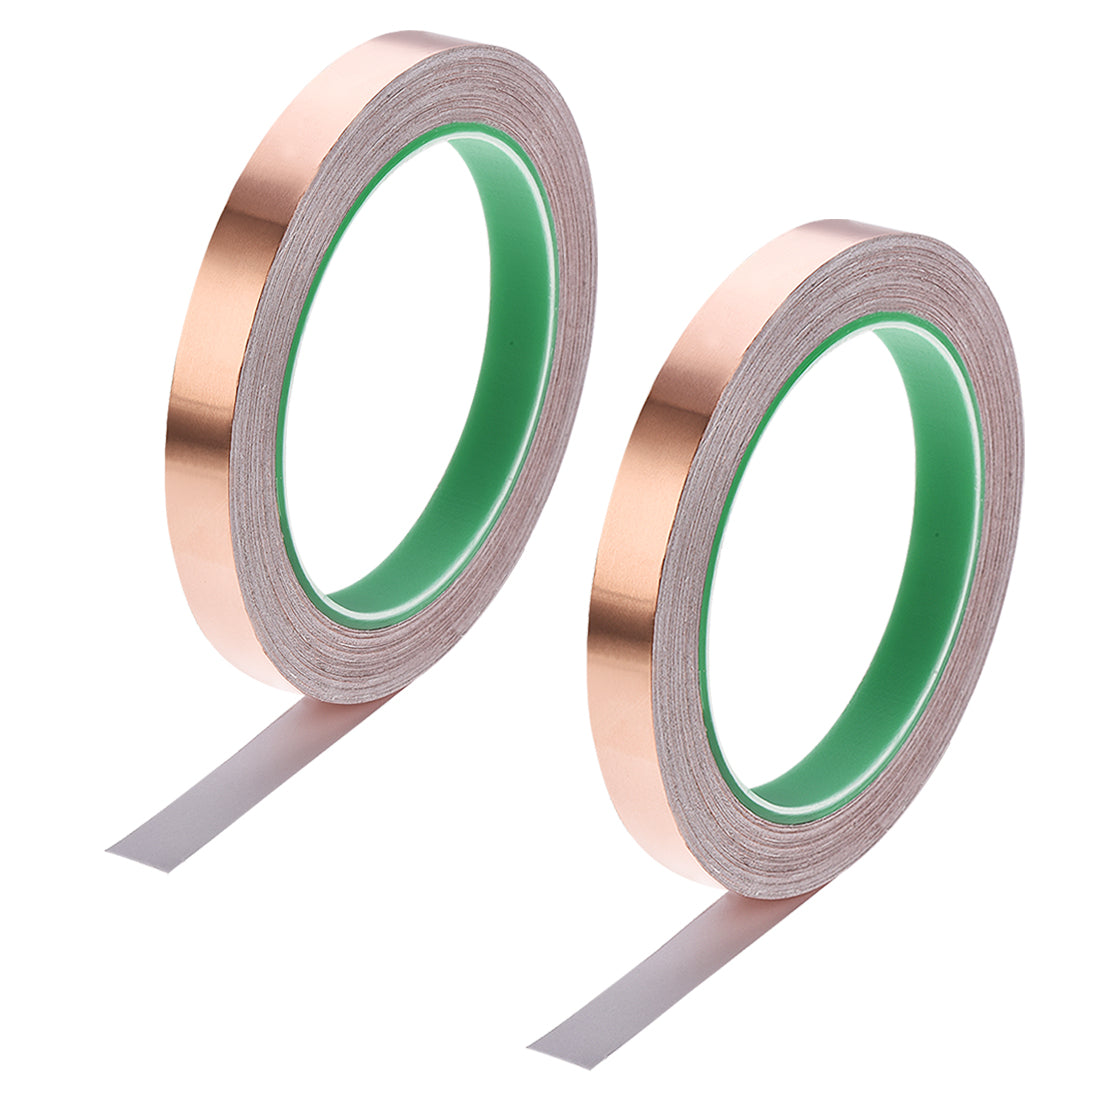 uxcell Uxcell Double Sided Conductive Tape Copper Foil Tape 12mm x 20m for EMI Shielding2 Roll